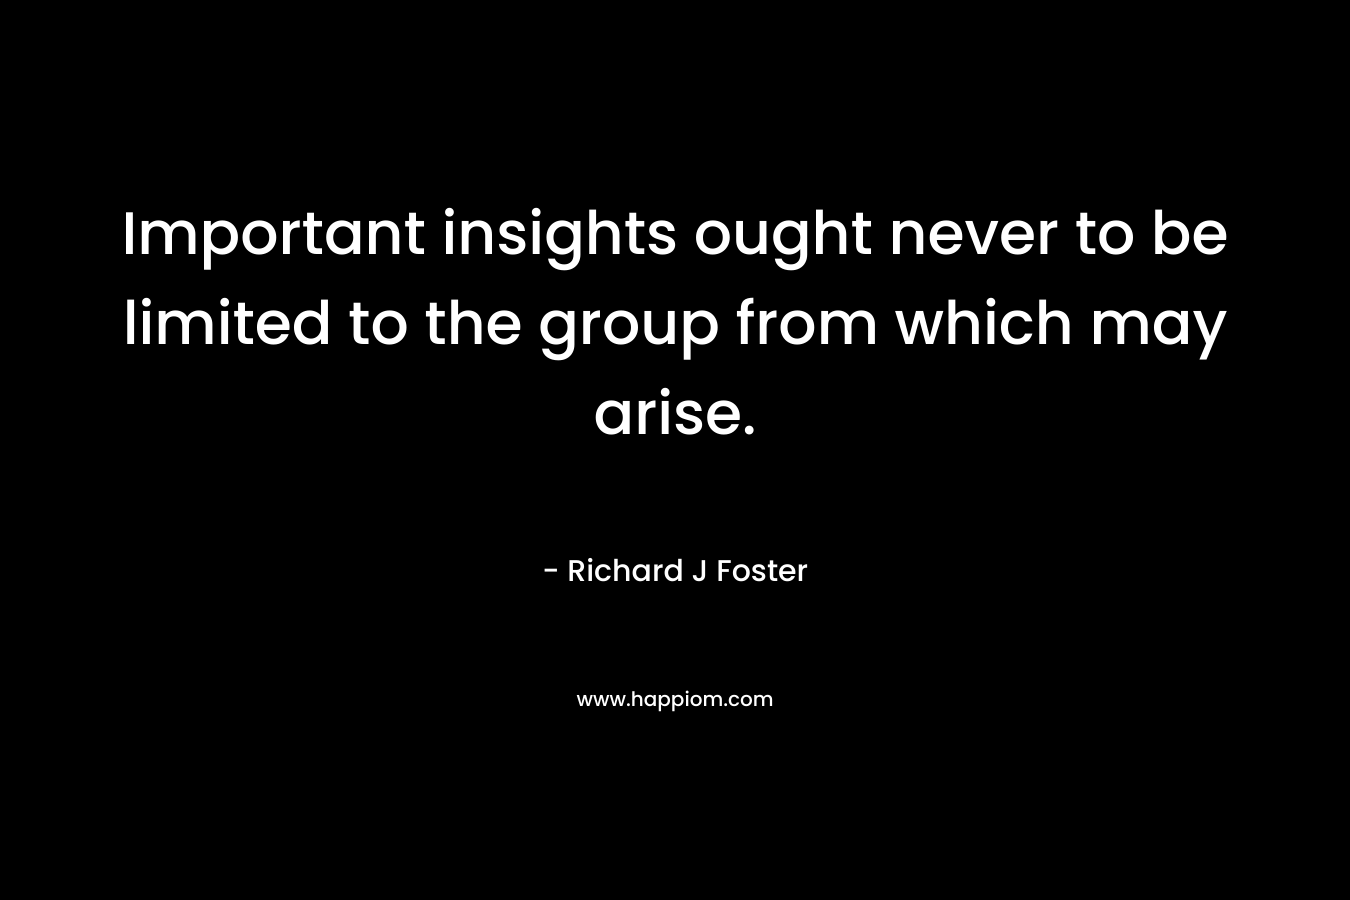 Important insights ought never to be limited to the group from which may arise. – Richard J Foster